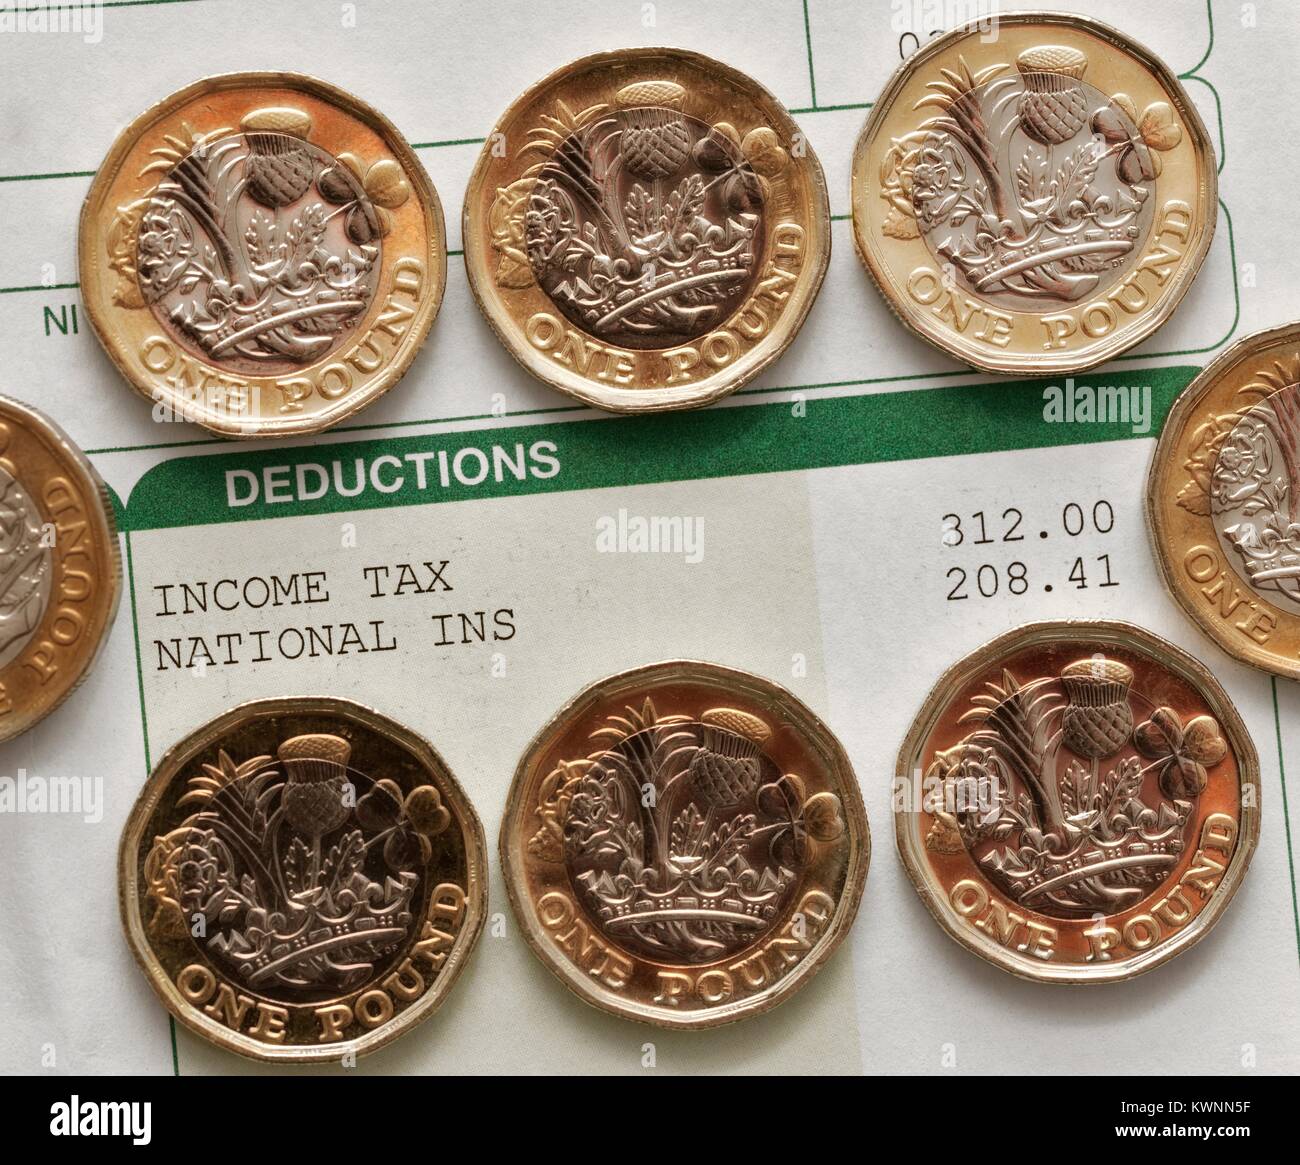 Income tax national insurance payments on a payslip with new one pound coins Stock Photo